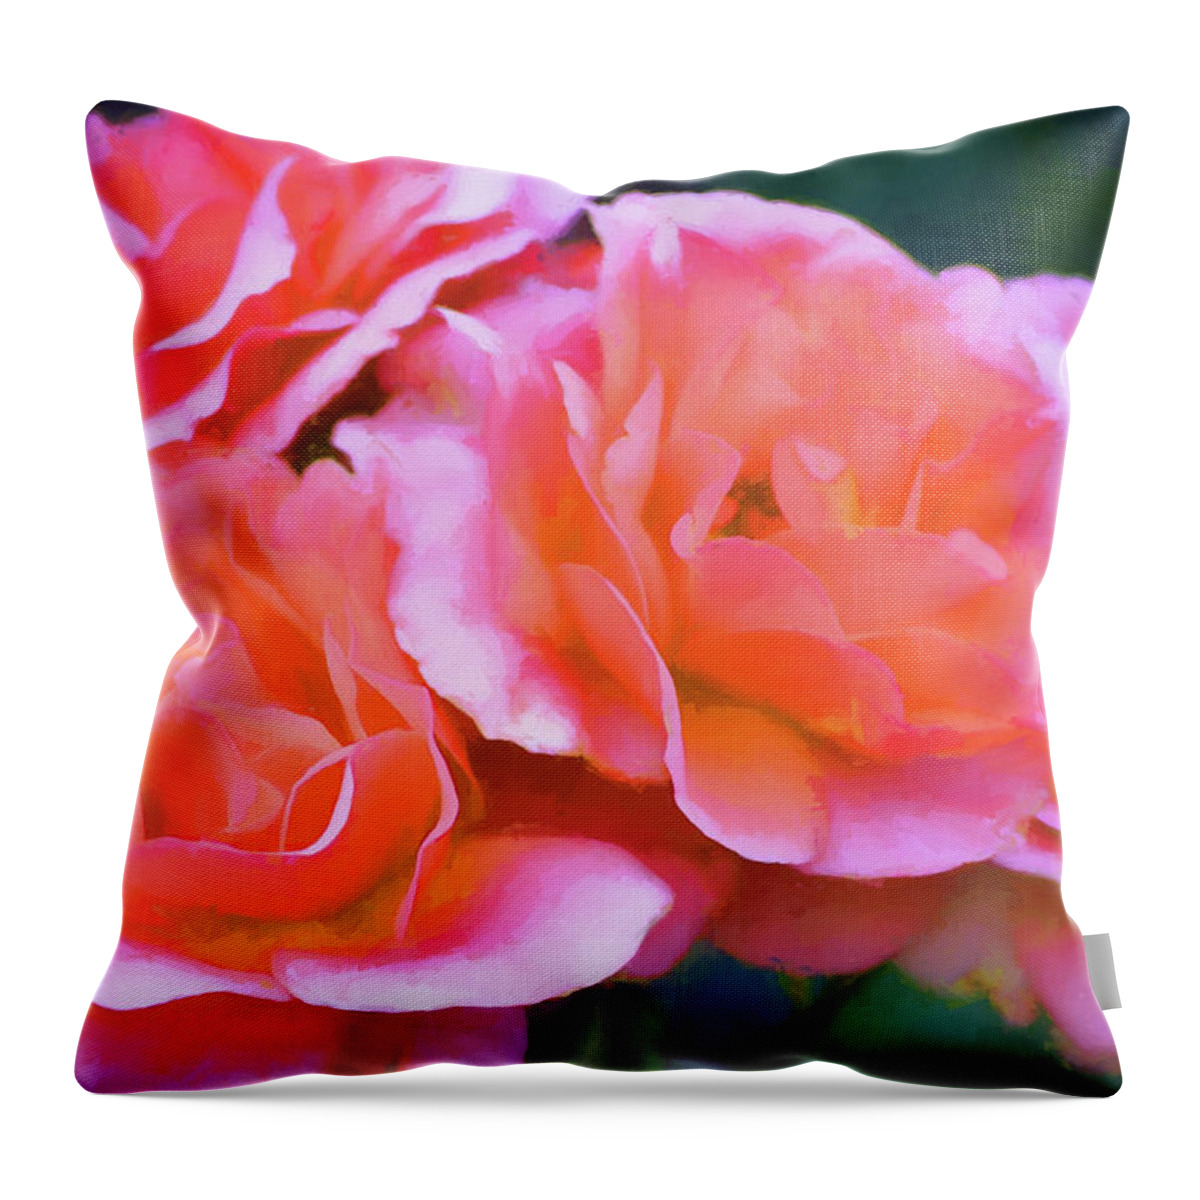 Floral Throw Pillow featuring the photograph Rose 369 by Pamela Cooper